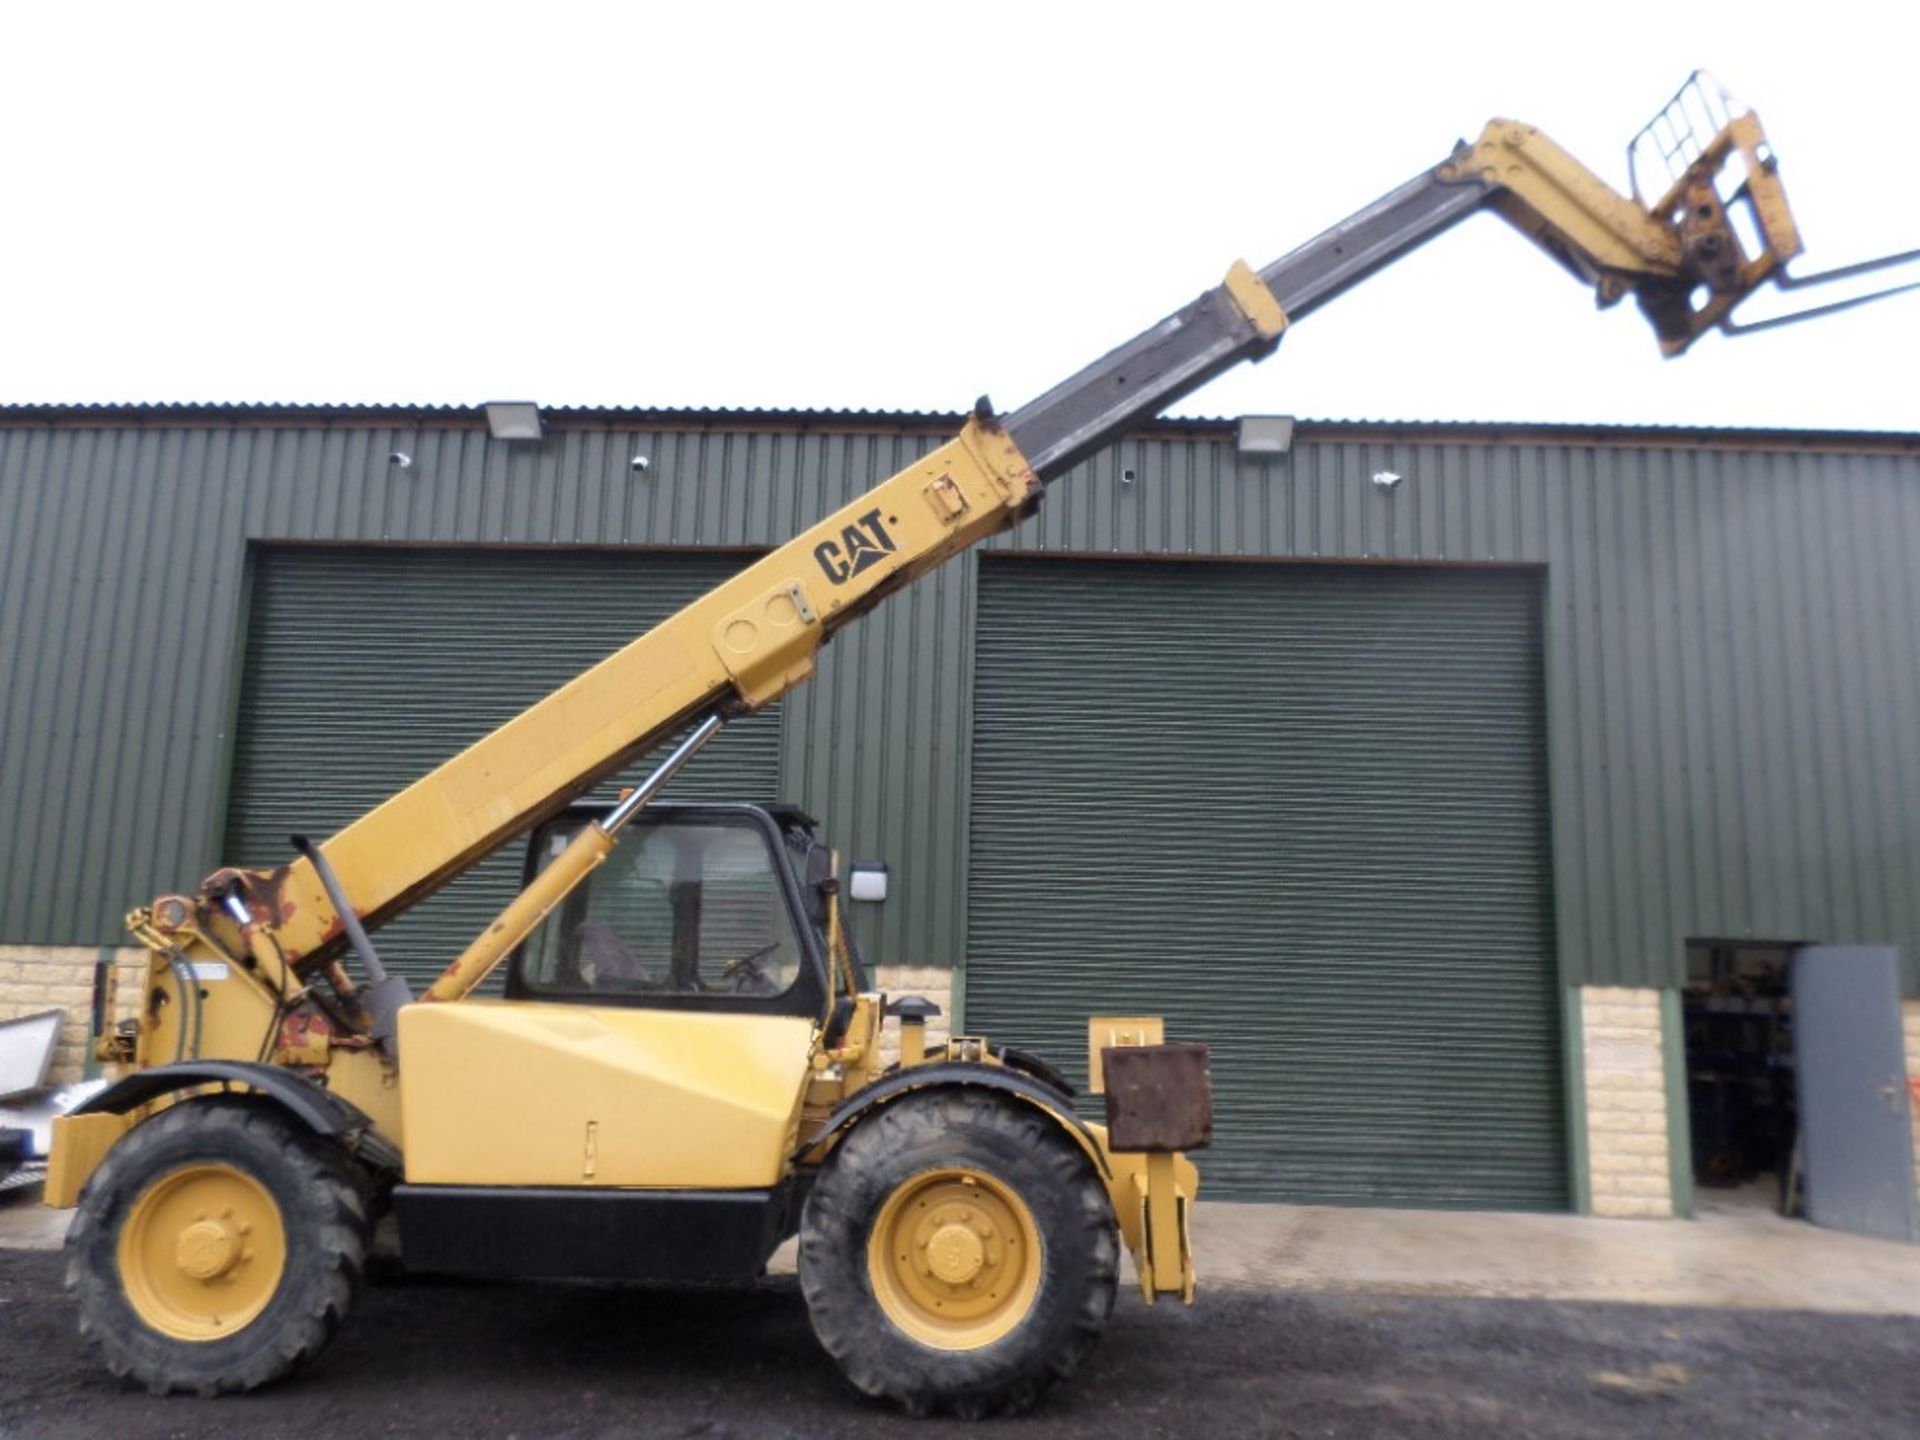 1999 CAT TH63 TELEPORTER (LOCATION SHEFFIELD) 5612 HOURS (RING FOR COLLECTION DETAILS) [+ VAT] - Image 6 of 13